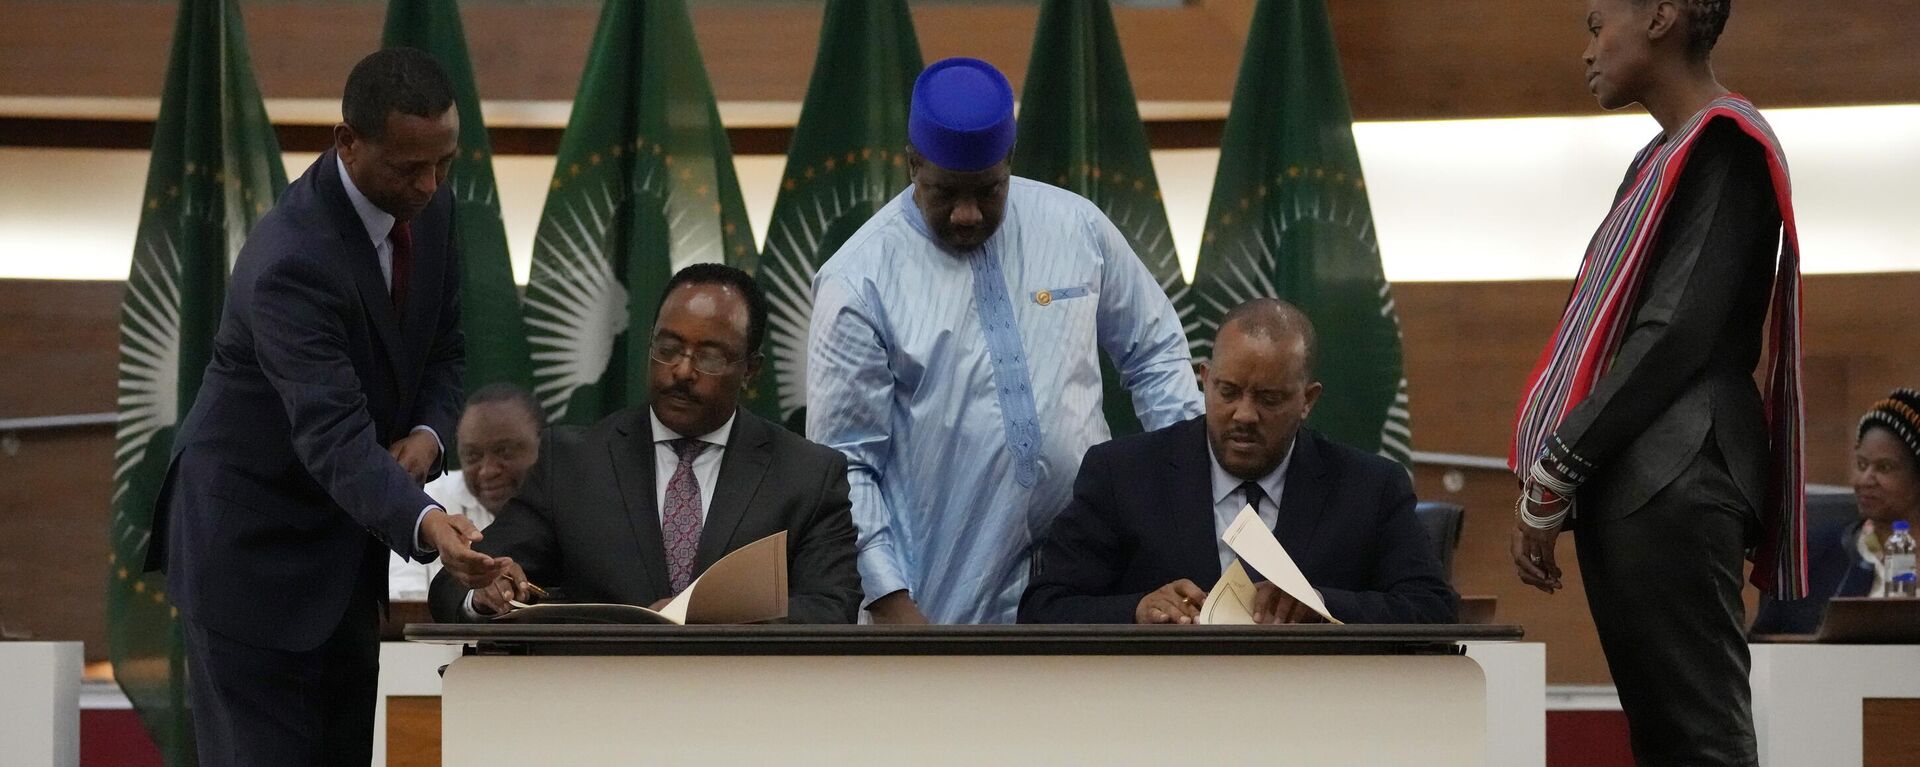 Lead negotiator for Ethiopia's government, Redwan Hussein, left, and lead Tigray negotiator Getachew Reda, right, sign documents during the peace talks in Pretoria, South Africa on Nov. 2, 2022.  - Sputnik International, 1920, 12.02.2023